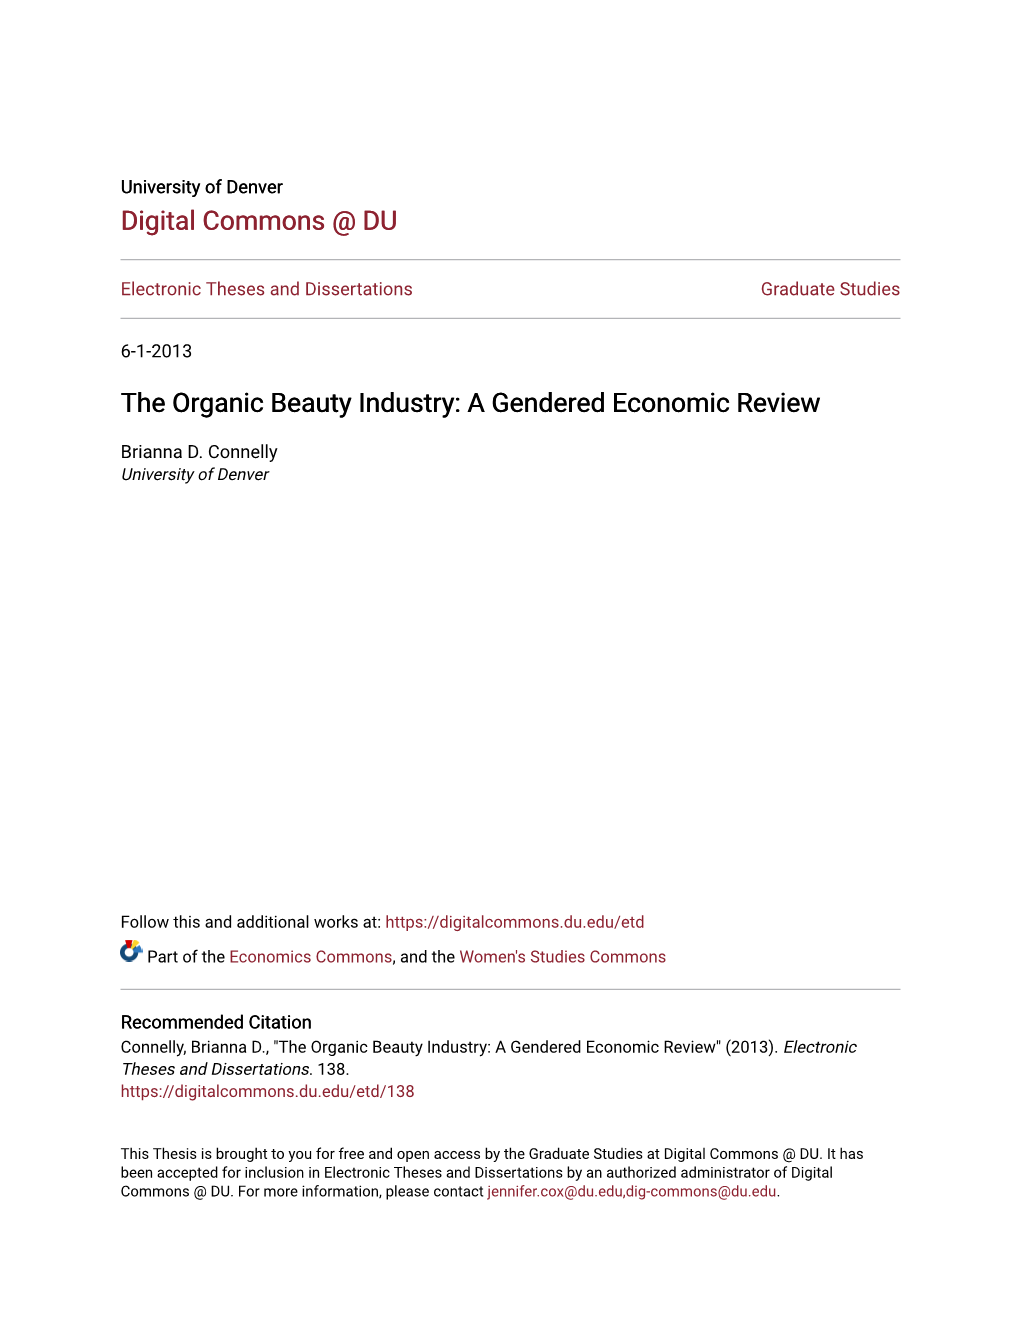 The Organic Beauty Industry: a Gendered Economic Review